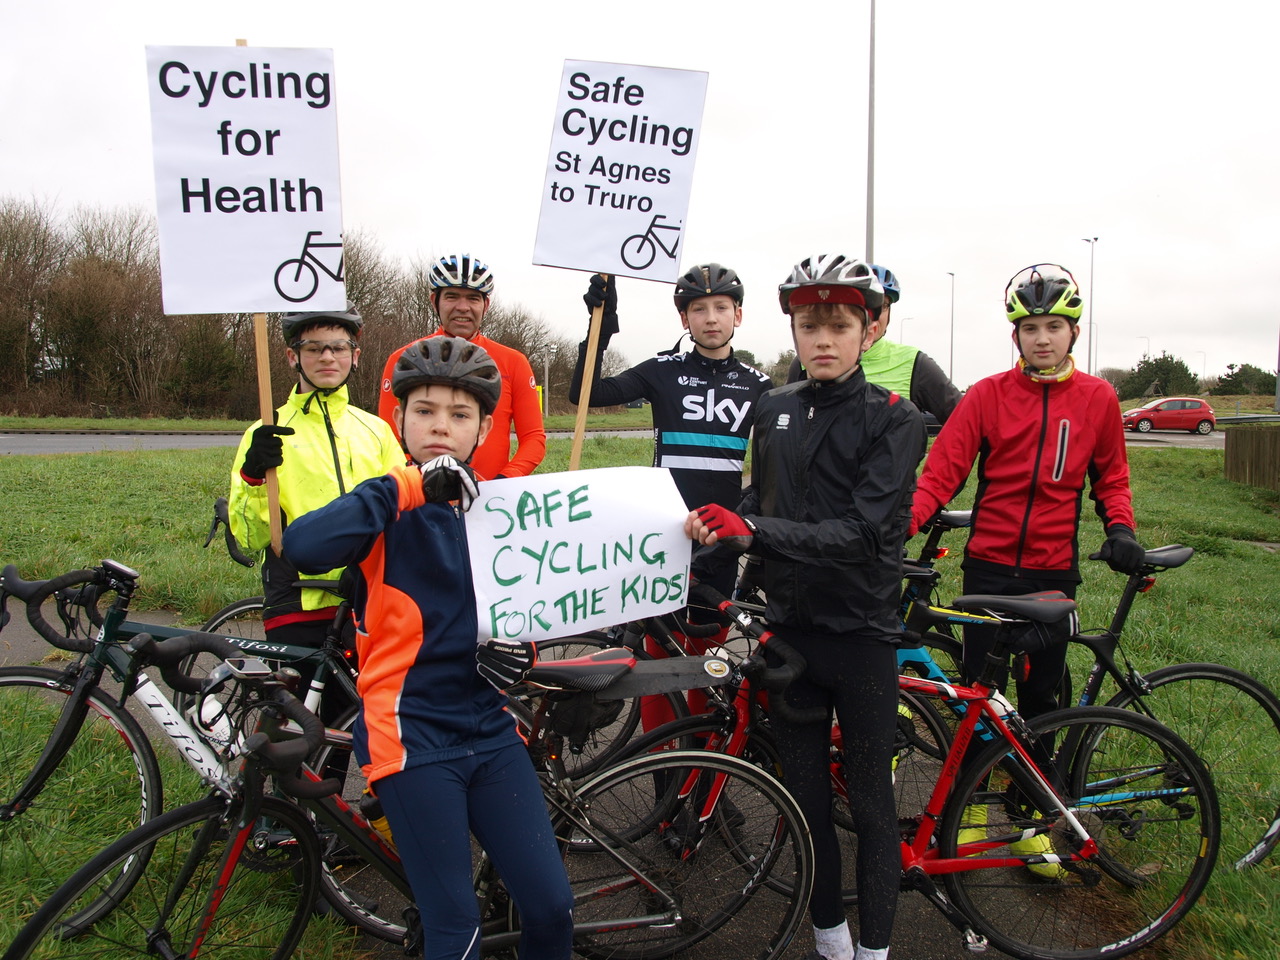 Group of young cyclists holding placards